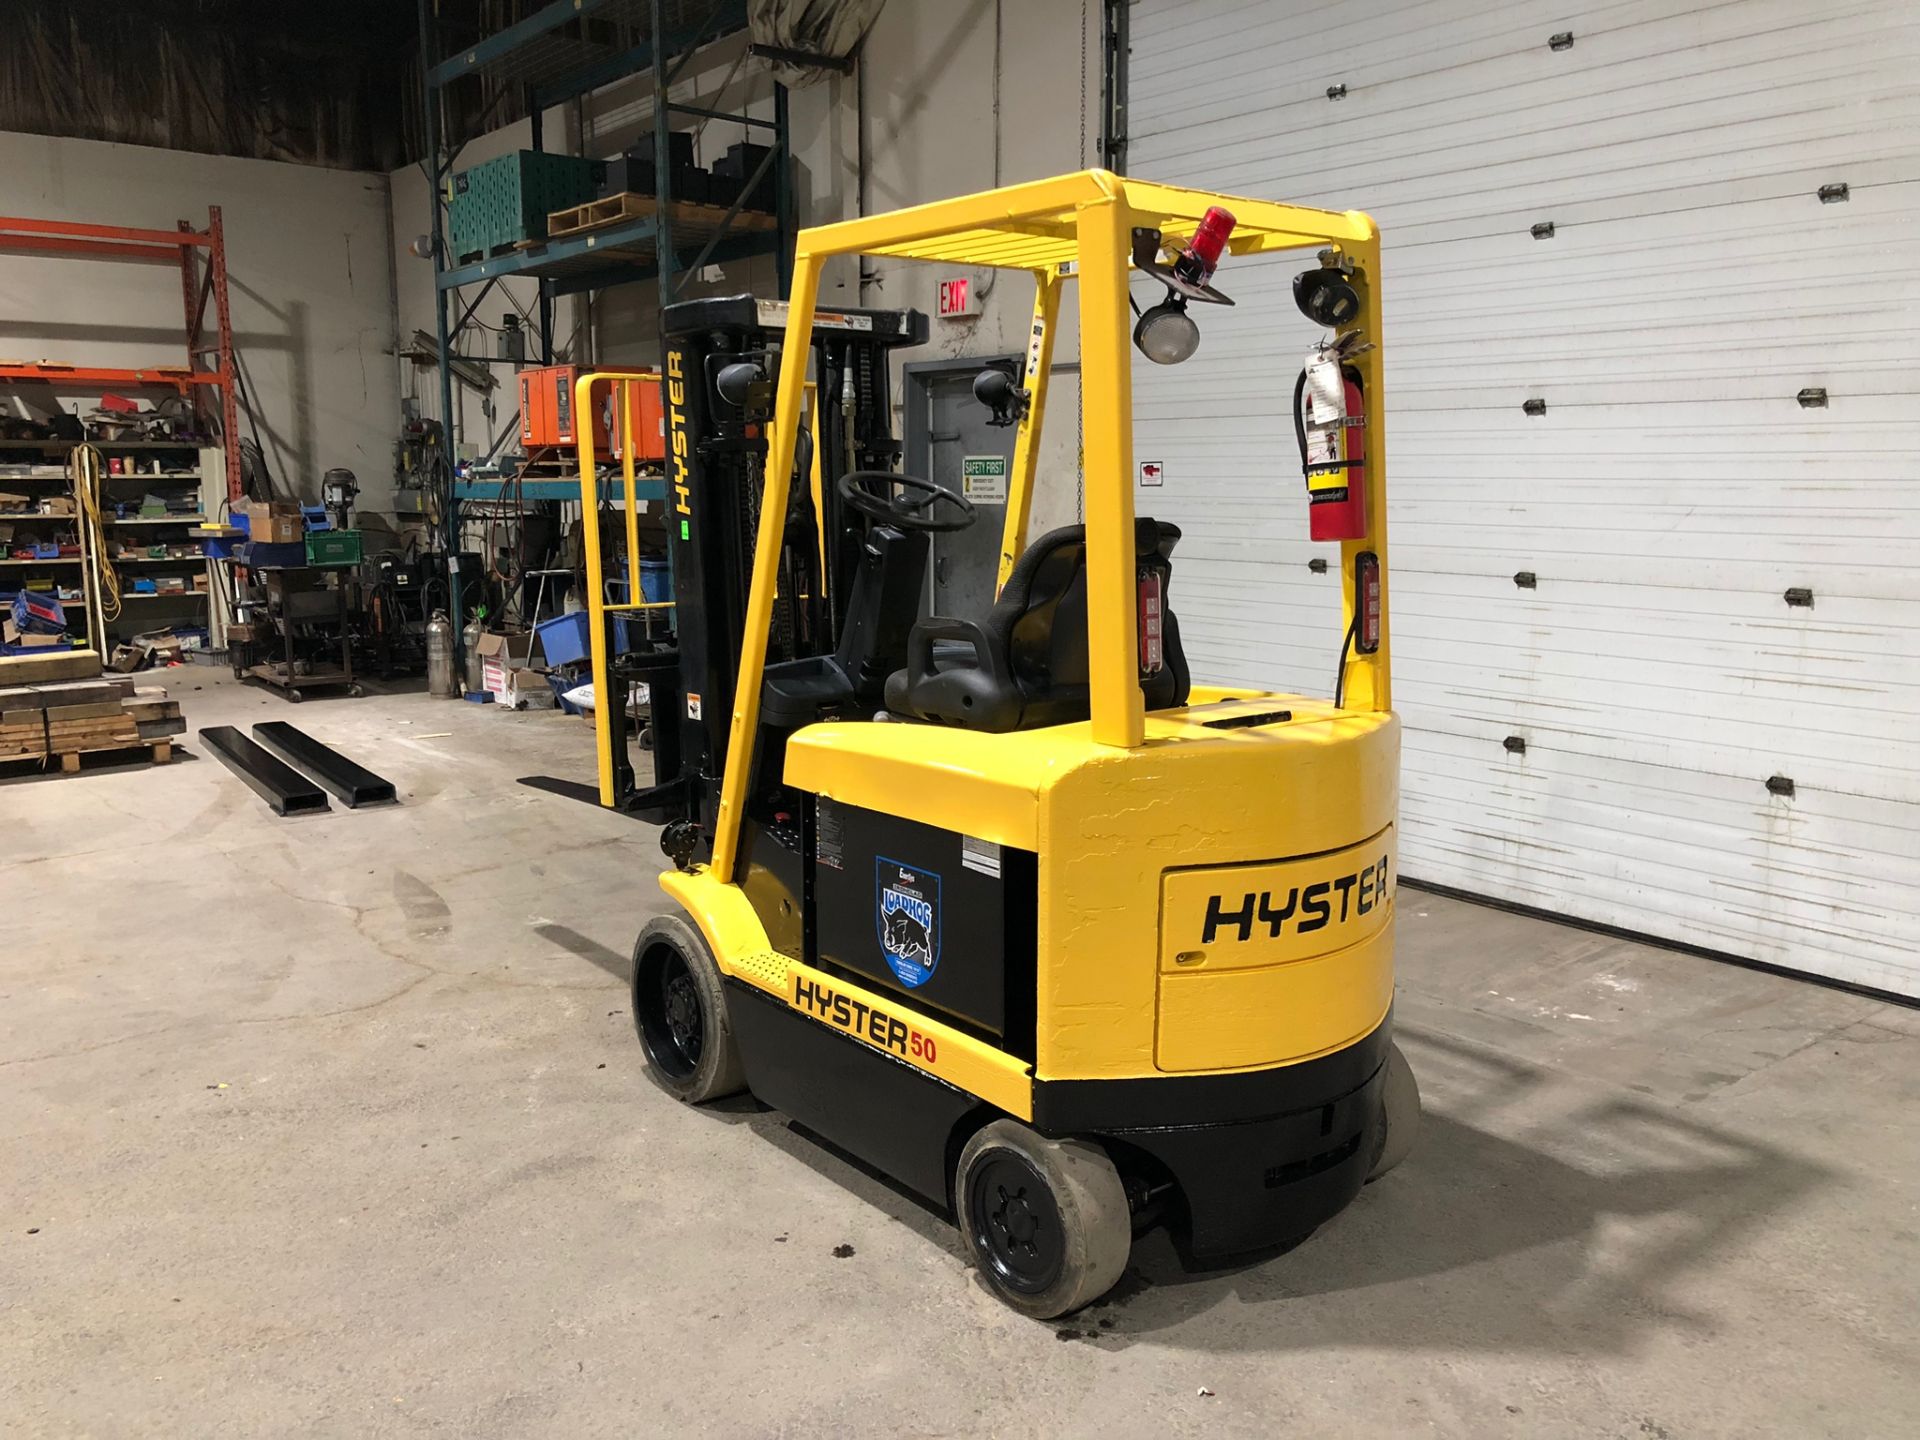 NICE Hyster 50 - 5,000lbs Capacity Forklift Electric with Sideshift 3-stage mast 48V - FREE CUSTOMS - Image 2 of 5